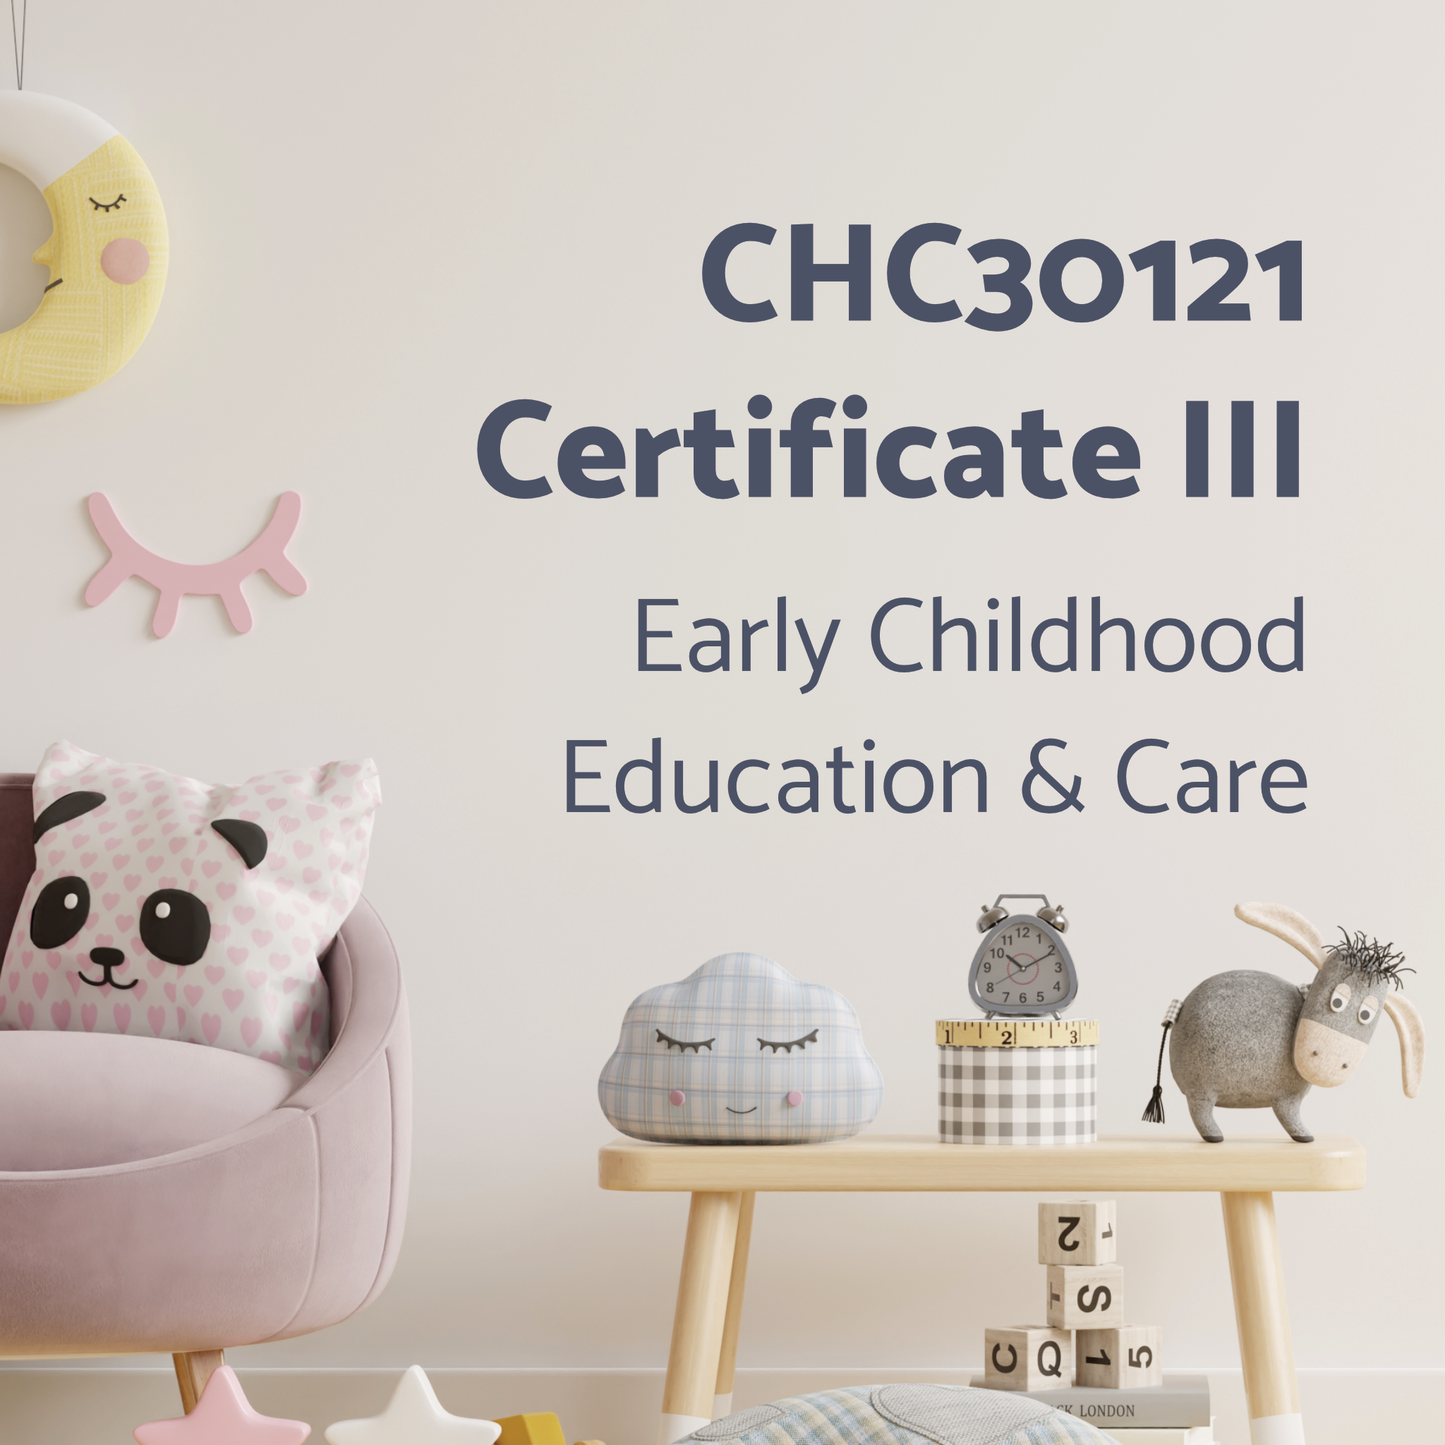 CHC30121 - Certificate III in Early Childhood Education and Care